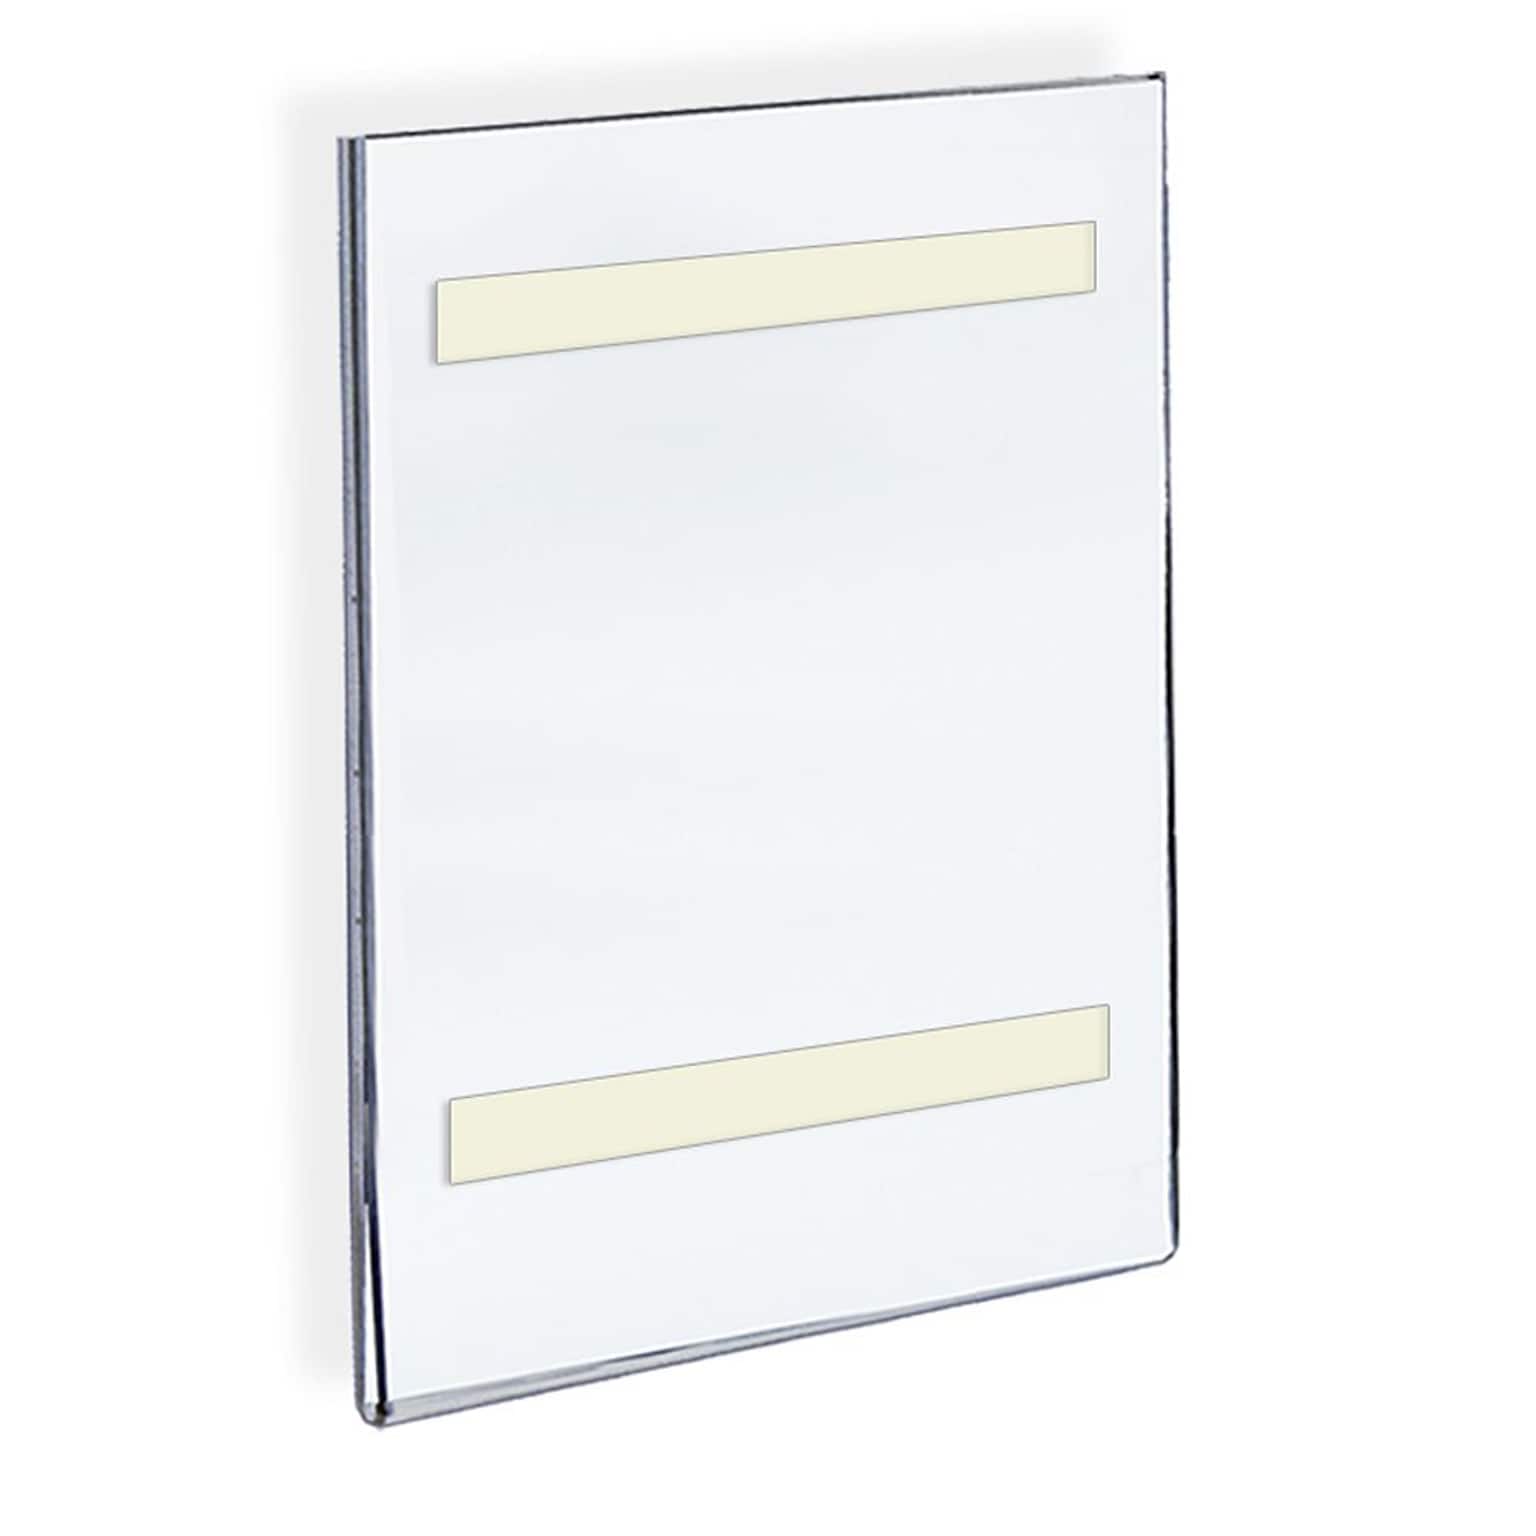 Azar Displays Adhesive Wall Sign Holder, 8.5W x 14H, Clear, 10/Pack (122013)